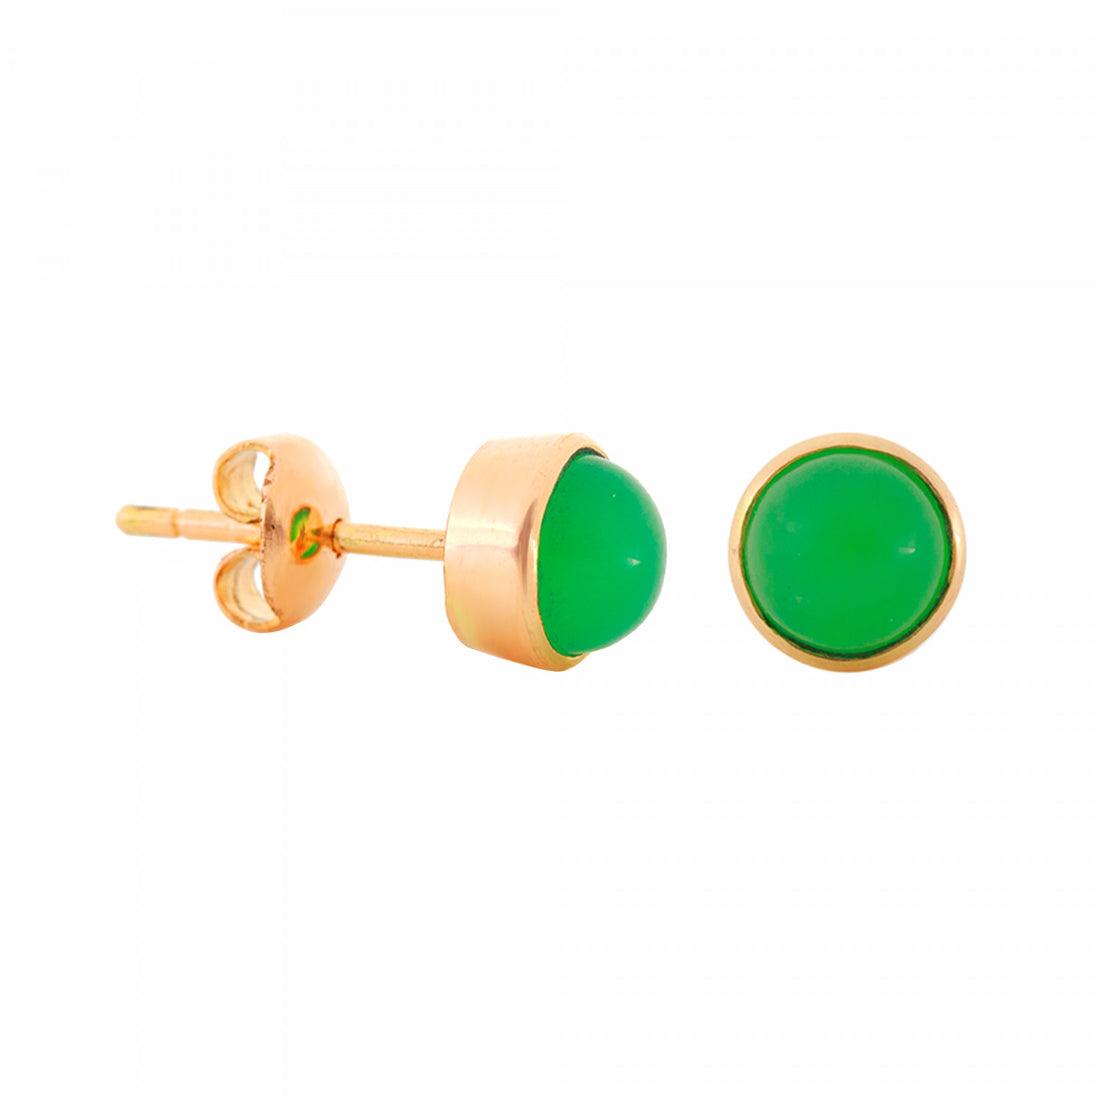 Simon Alexander 9ct Yellow Gold and Chrysoprase Round Stud Earrings - Rococo Jewellery